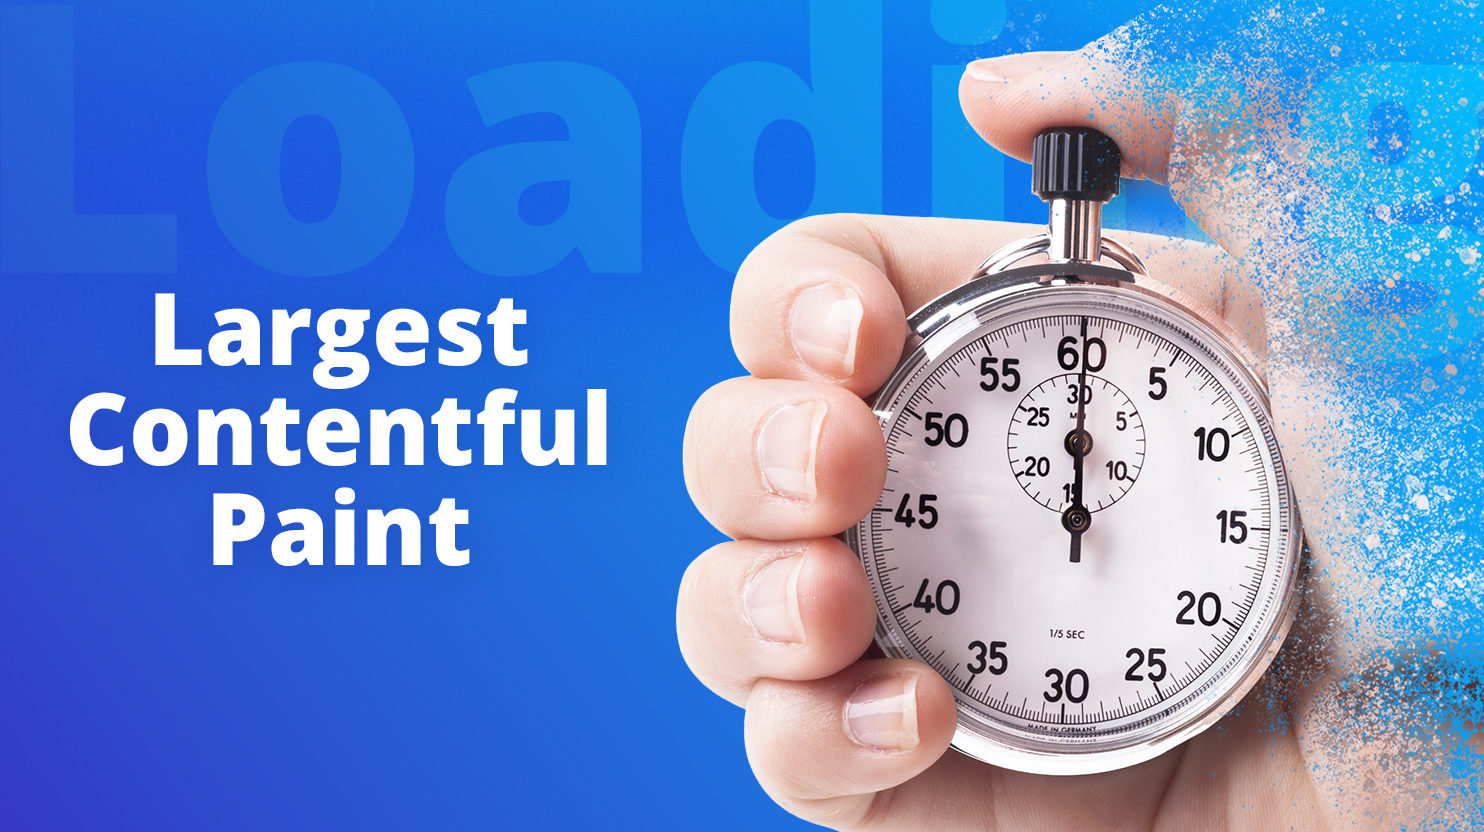 Largest Contentful Paint: How to Improve Your Score Forever | 10Web